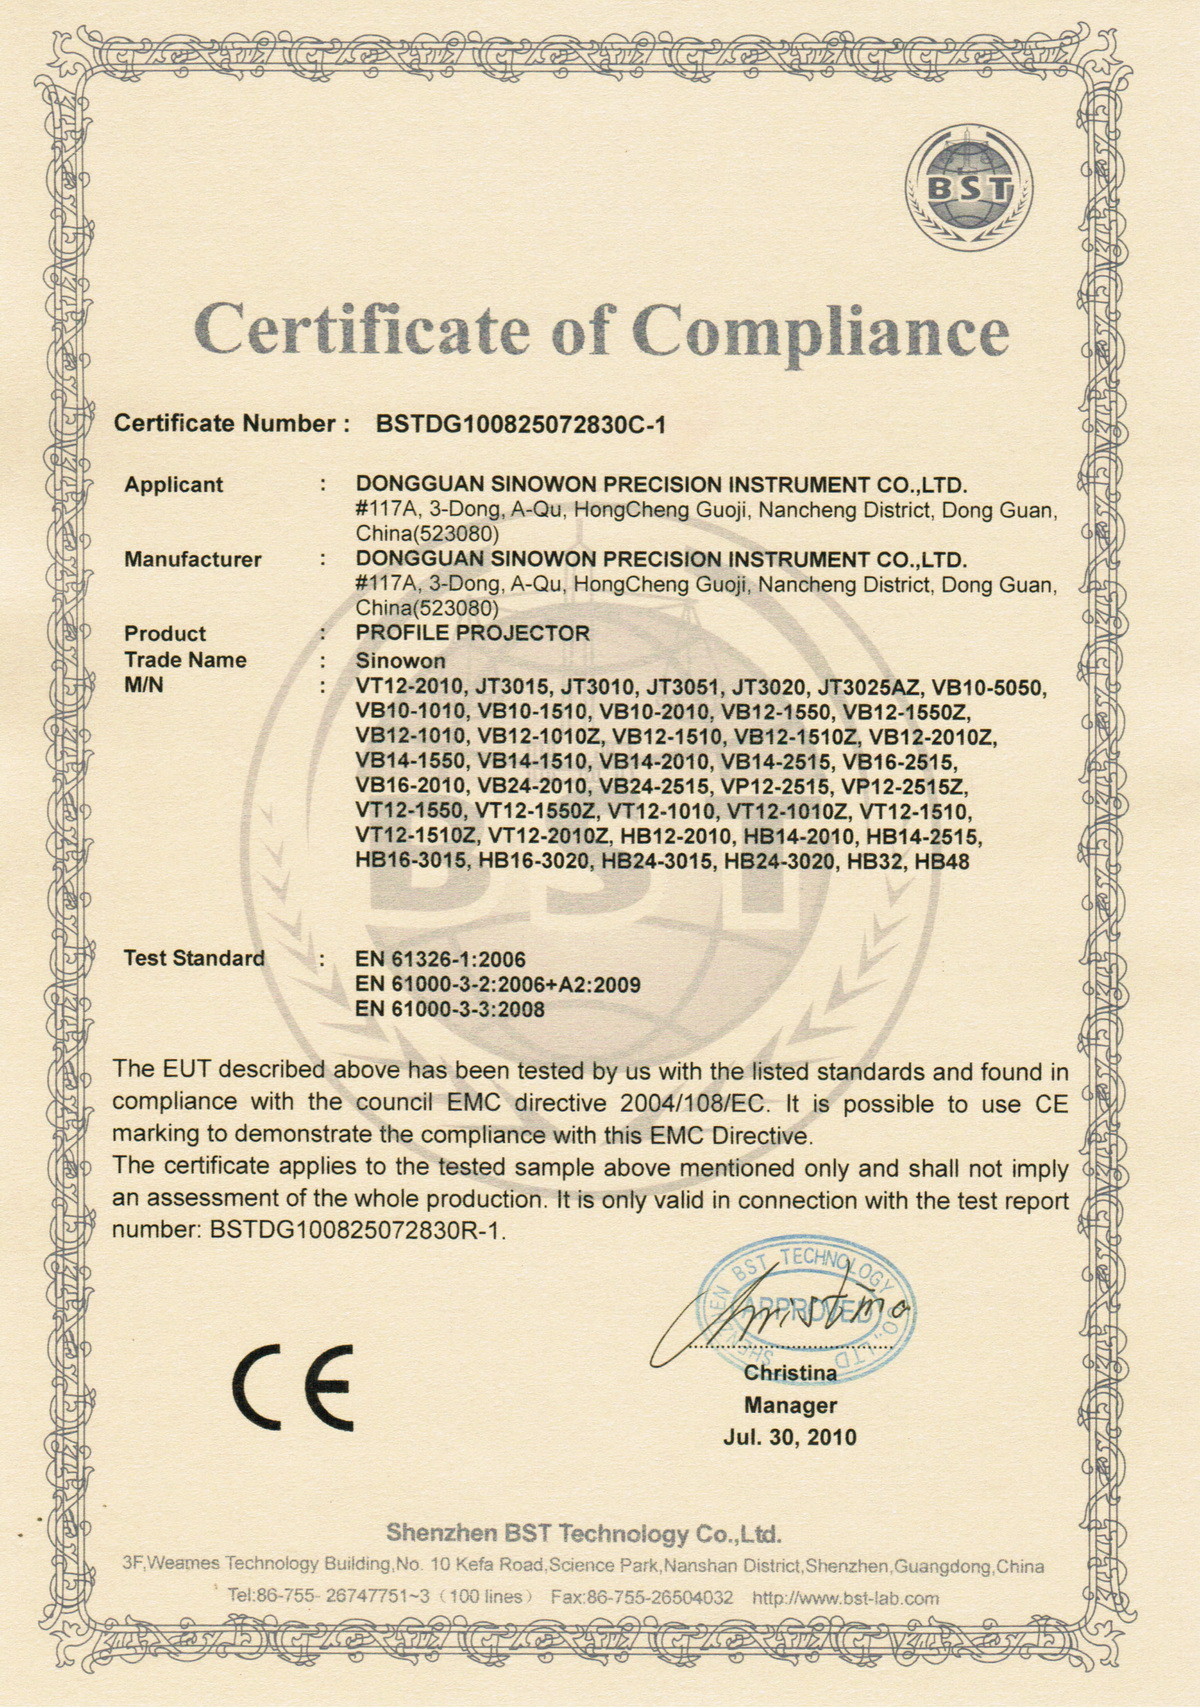 Guangdong Hoyamo Precision Instrument Limited Certifications